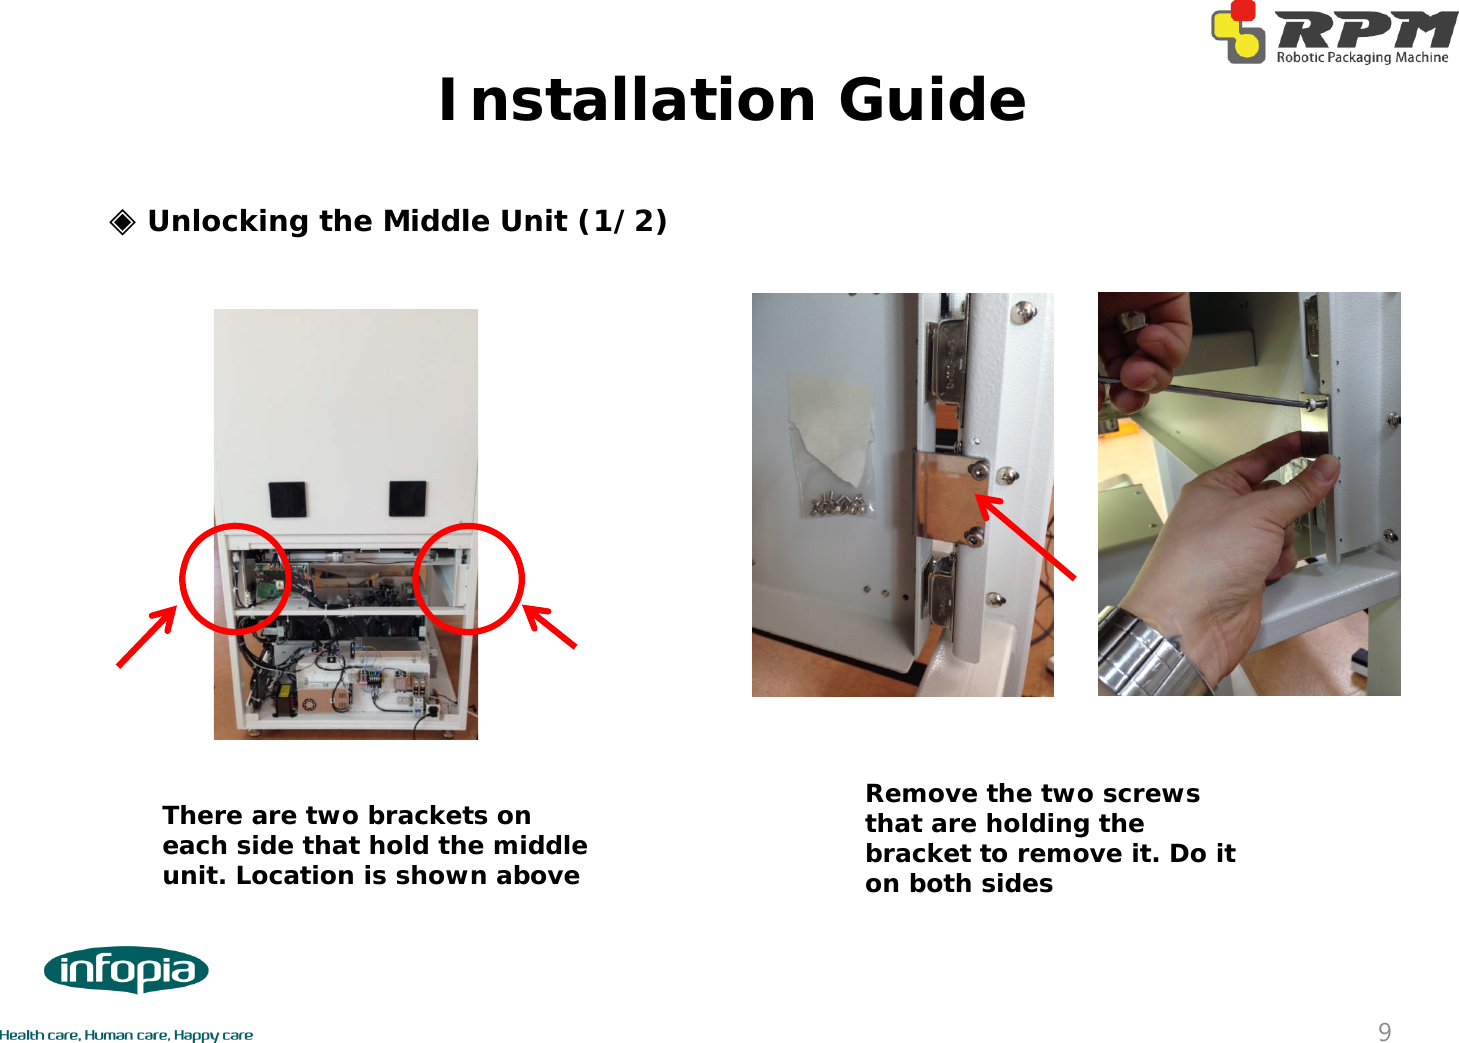 Installation Guide9◈Unlocking the Middle Unit (1/2)There are two brackets on each side that hold the middle unit. Location is shown aboveRemove the two screws that are holding the bracket to remove it. Do it on both sides